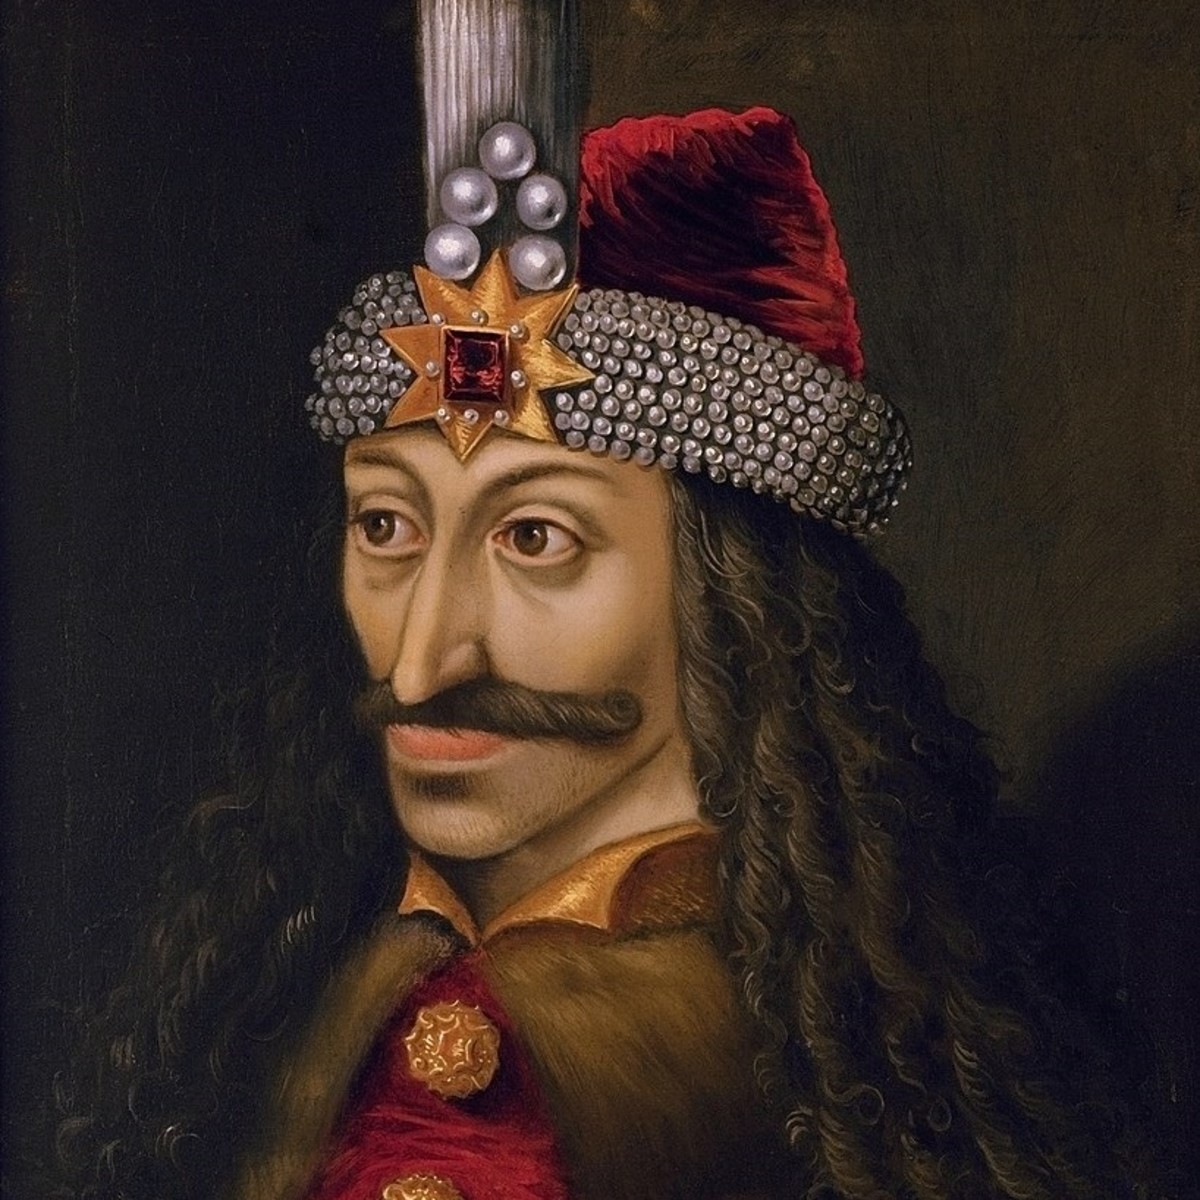 25 Facts About Vlad Tepes the Impaler